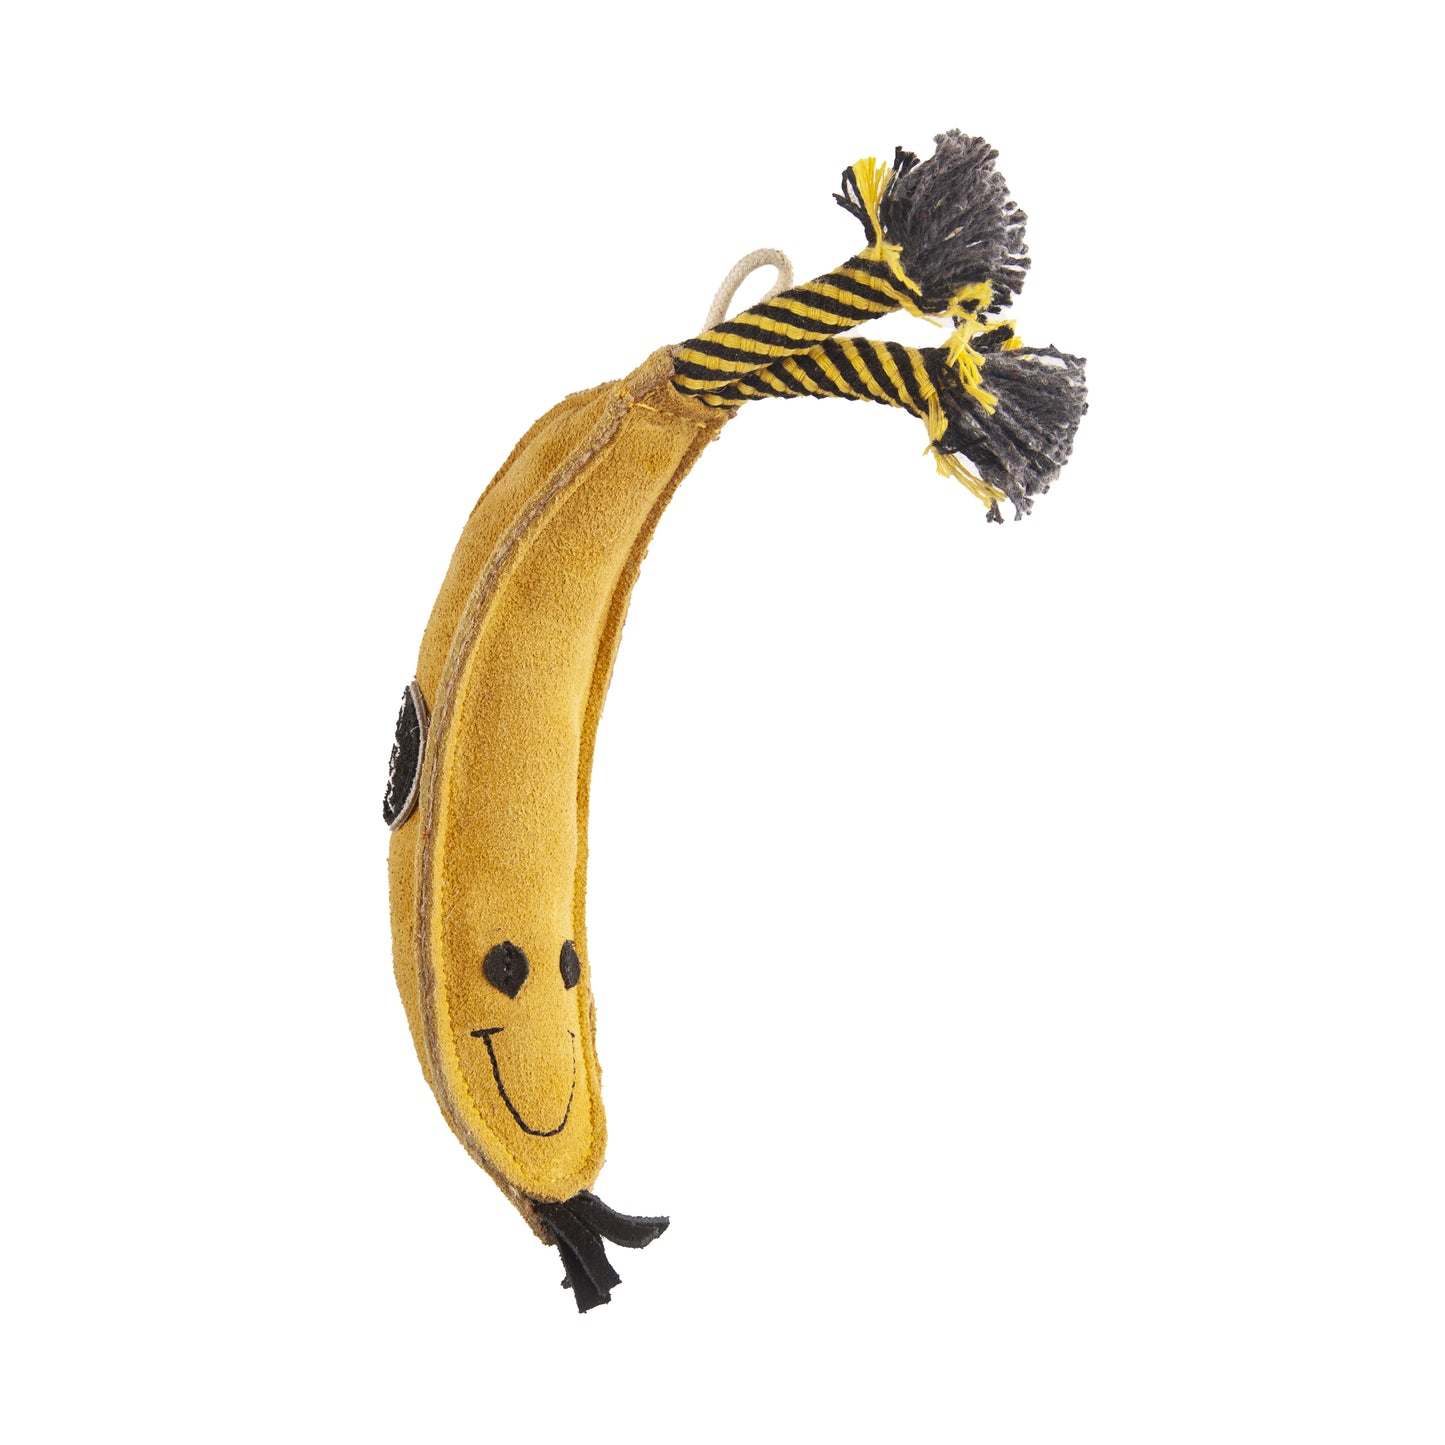 Barry the Banana Eco Dog Toy - Doggy Baking Co by The Bottled Baking Co